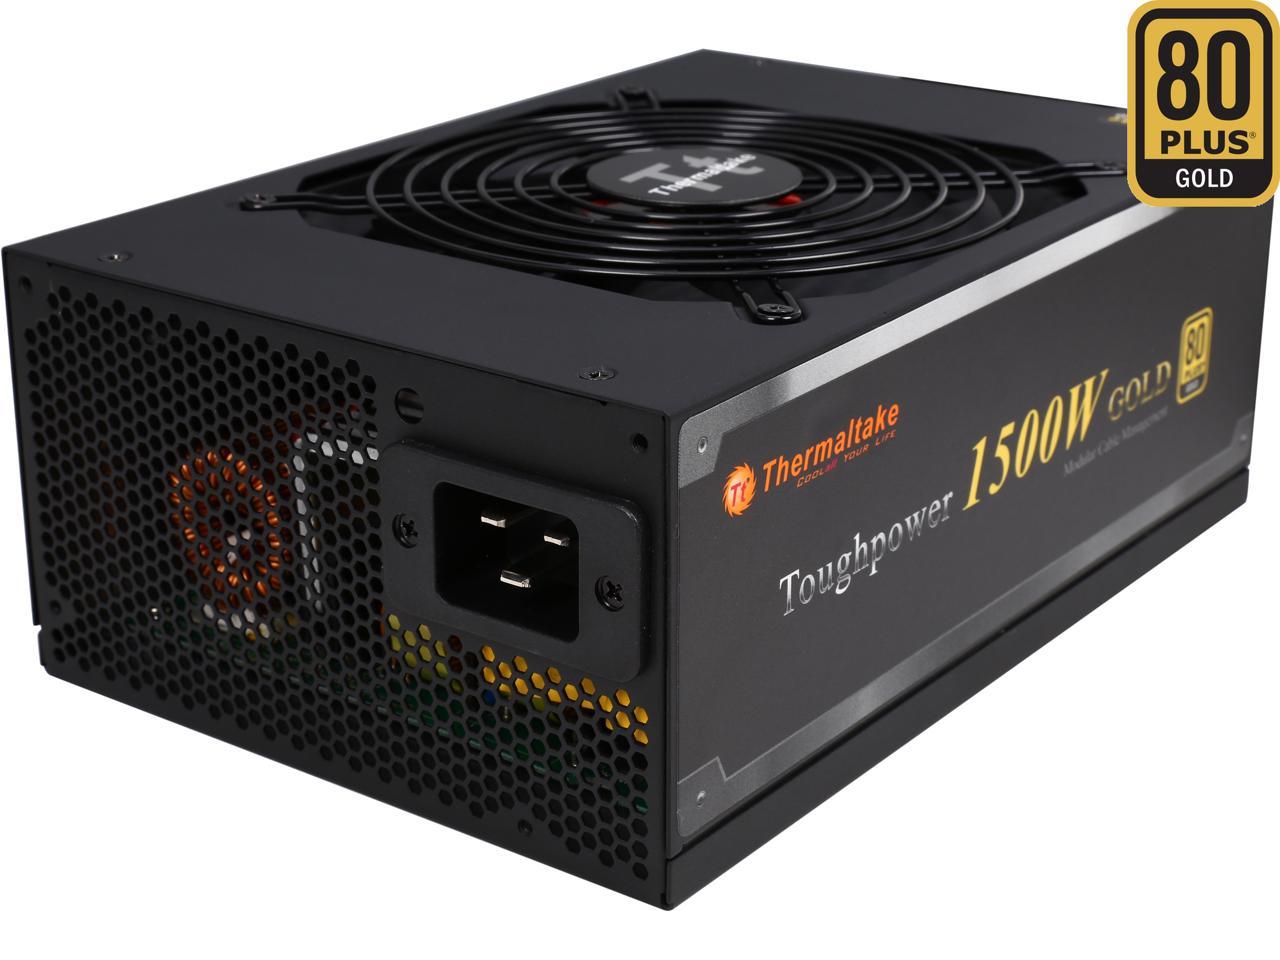 Thermaltake Toughpower 1500W SLI/CrossFire Ready ATX 12V V2.3 / EPS 12V v2.92 80 PLUS GOLD Certified 7 Year Warranty Full Modular Active PFC Power Supply Haswell Ready PS-TPD-1500MPCGUS-1